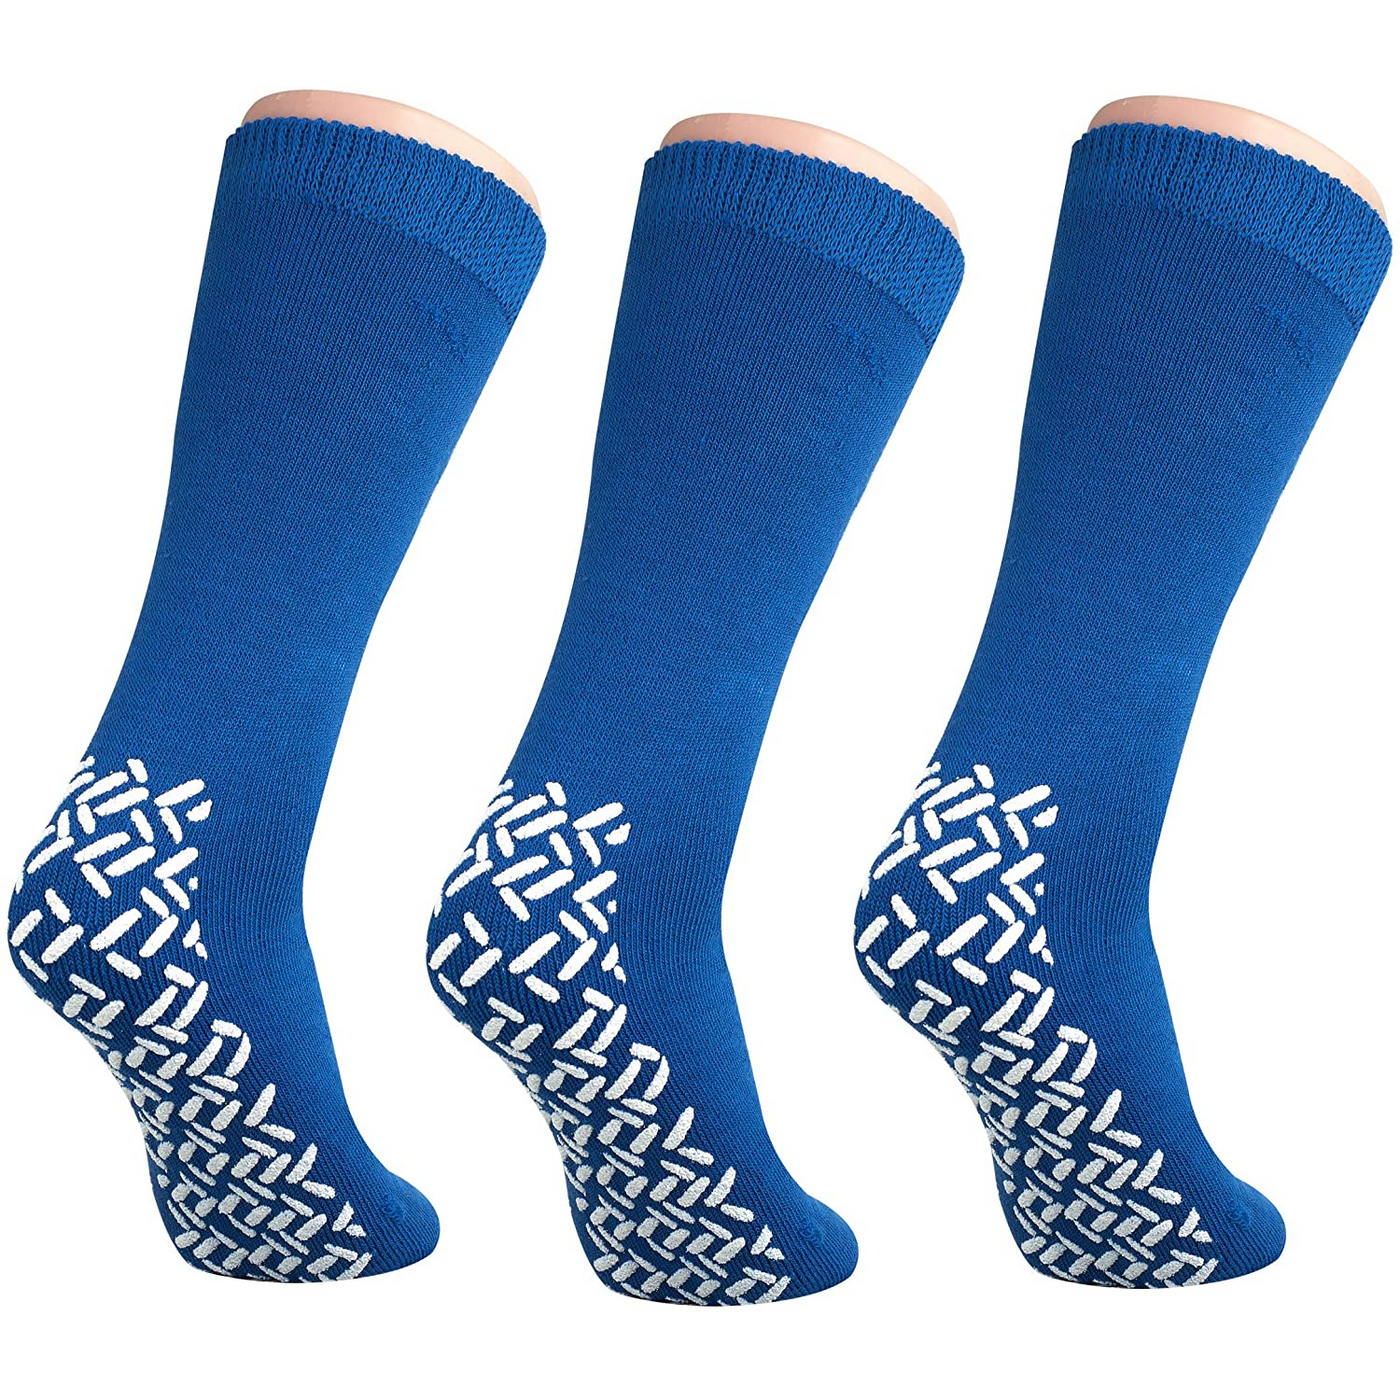 Nobles Assorted Anti Skid/ No Slip Hospital Gripper Socks, Great for  adults, men, women. Designed for medical hospital patients but great for  everyone